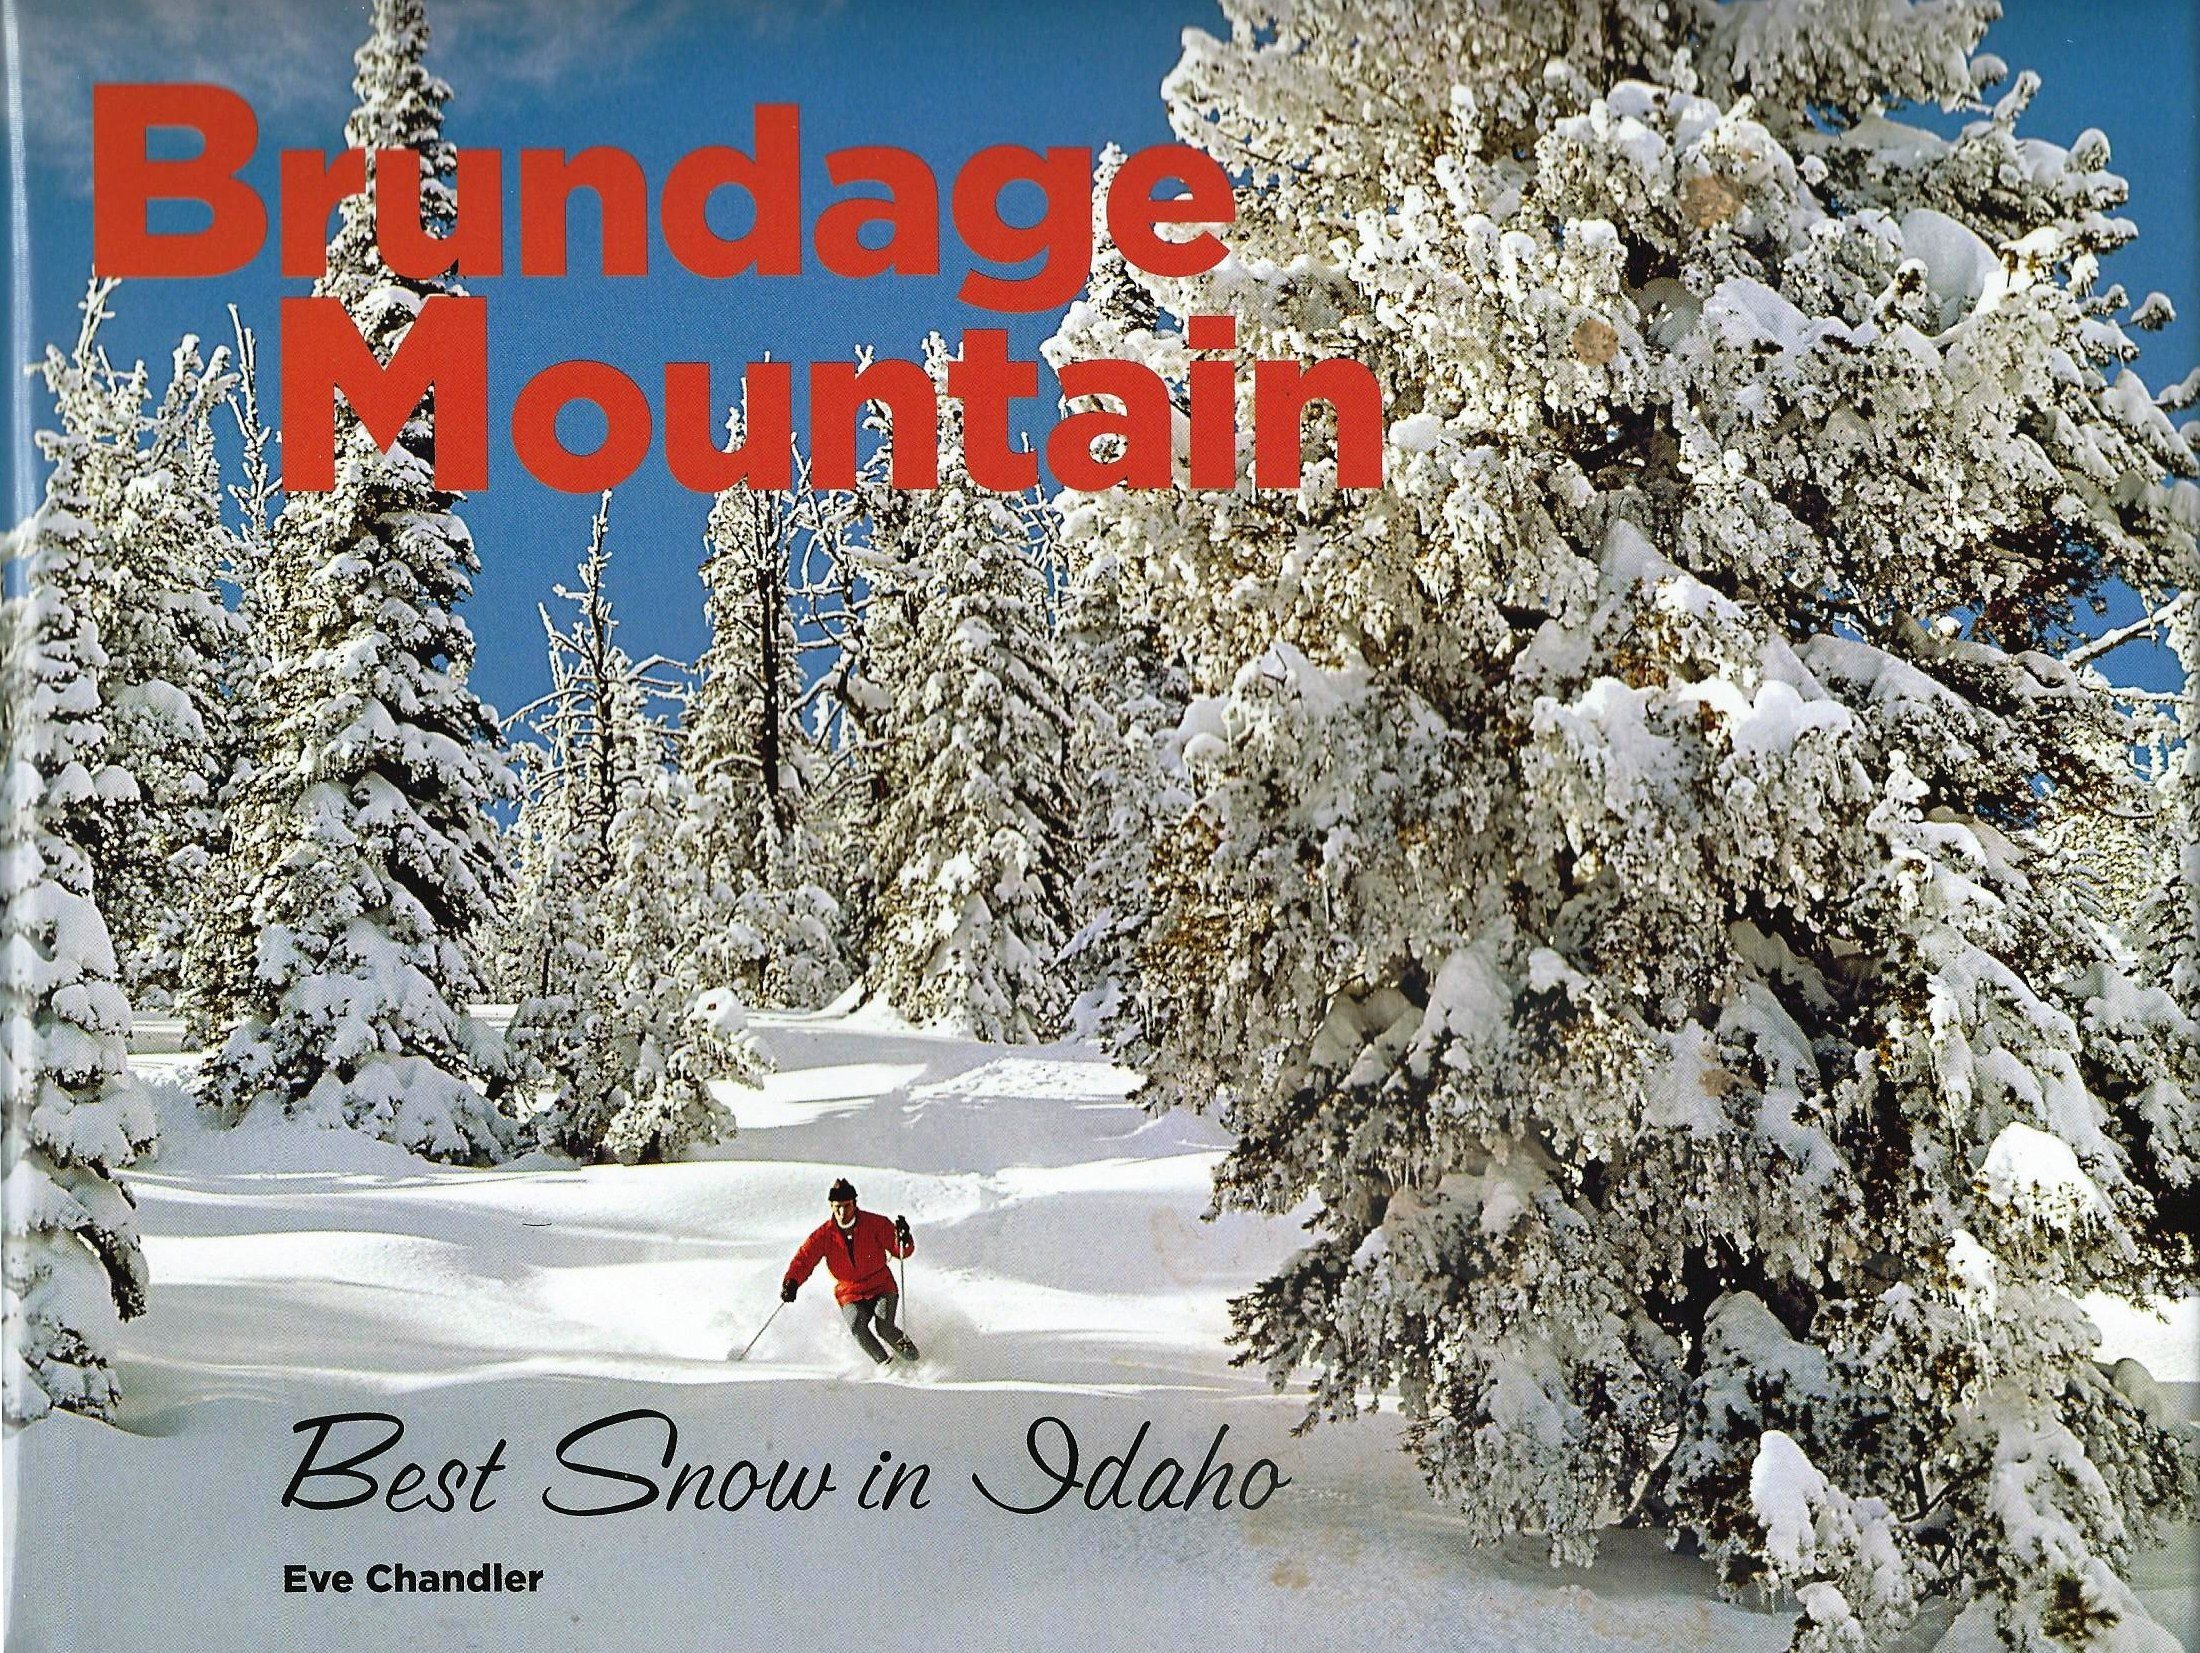 Brundage mountain: Best snow in Idaho (book cover)